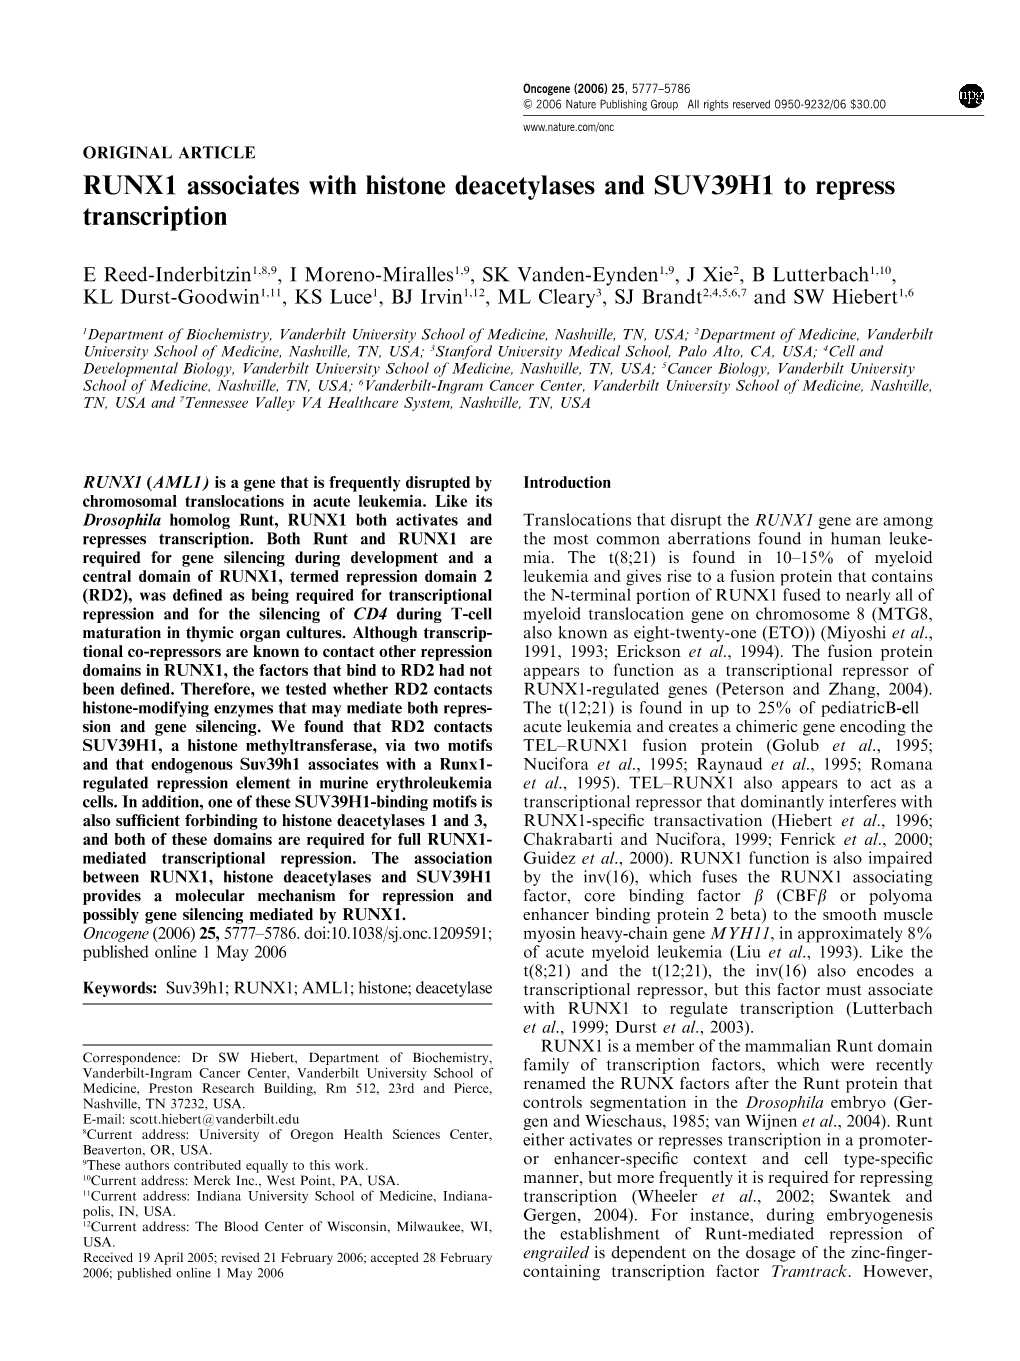 RUNX1 Associates with Histone Deacetylases and SUV39H1 to Repress Transcription